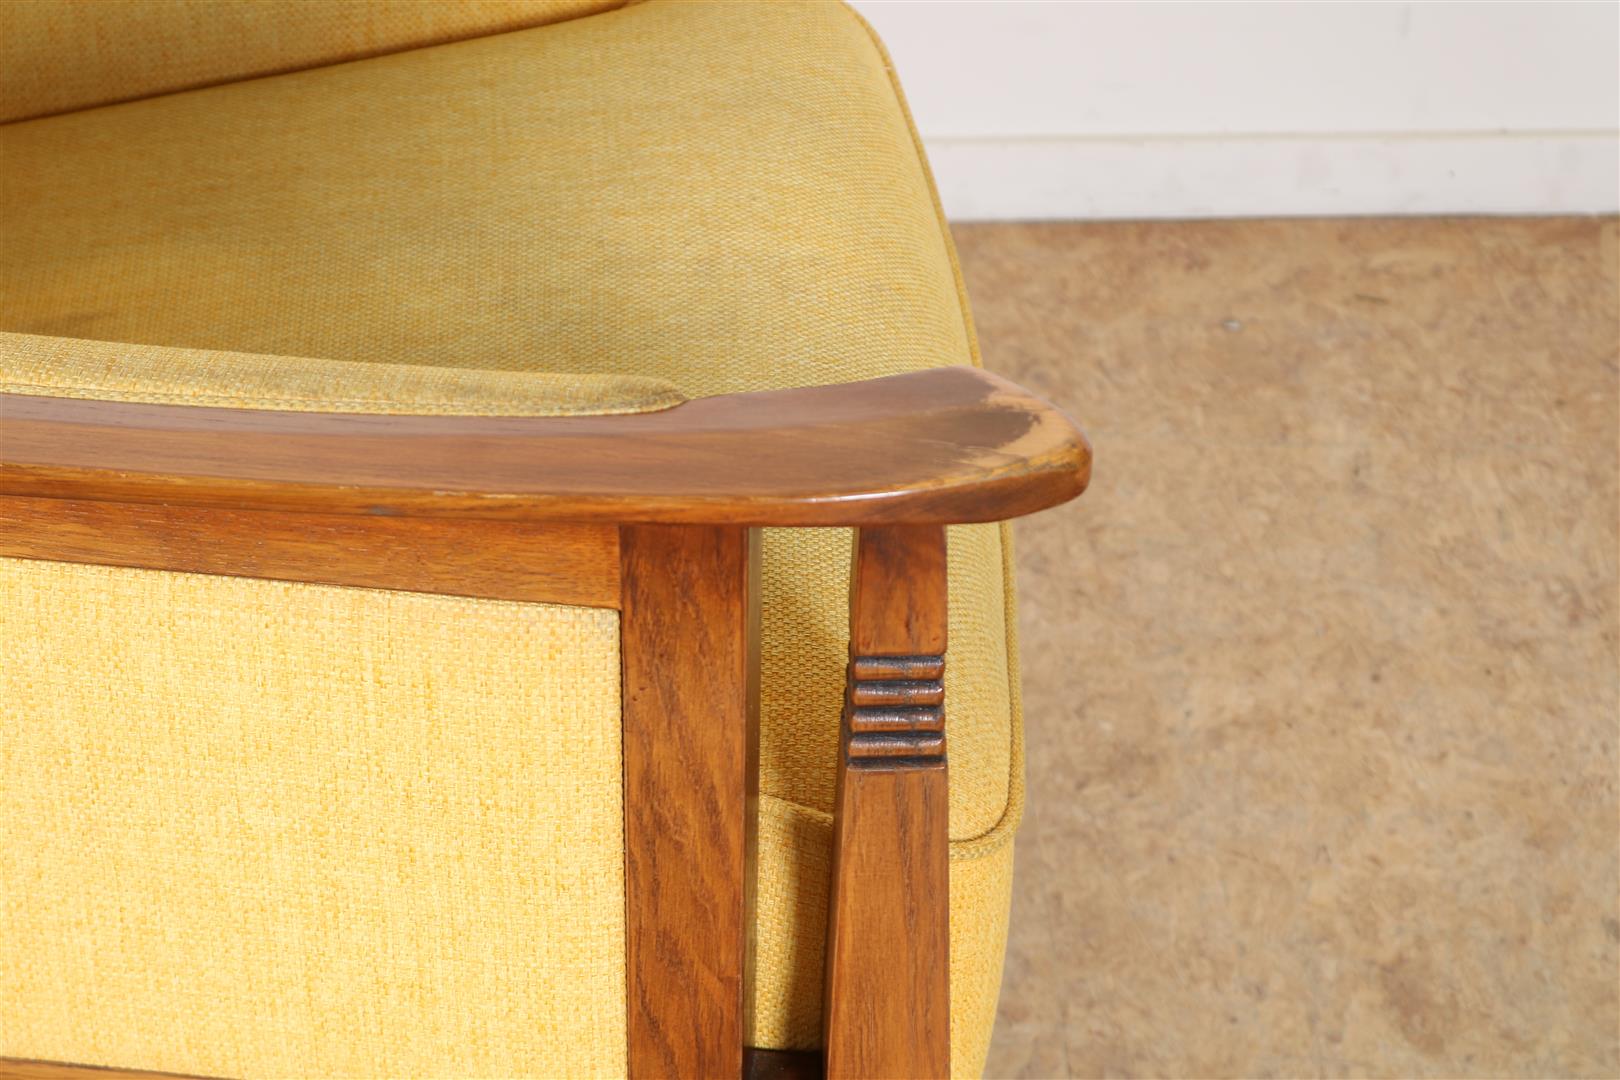 Oak Schuitema armchair with ocher yellow fabric upholstery (signs of use) - Image 5 of 5